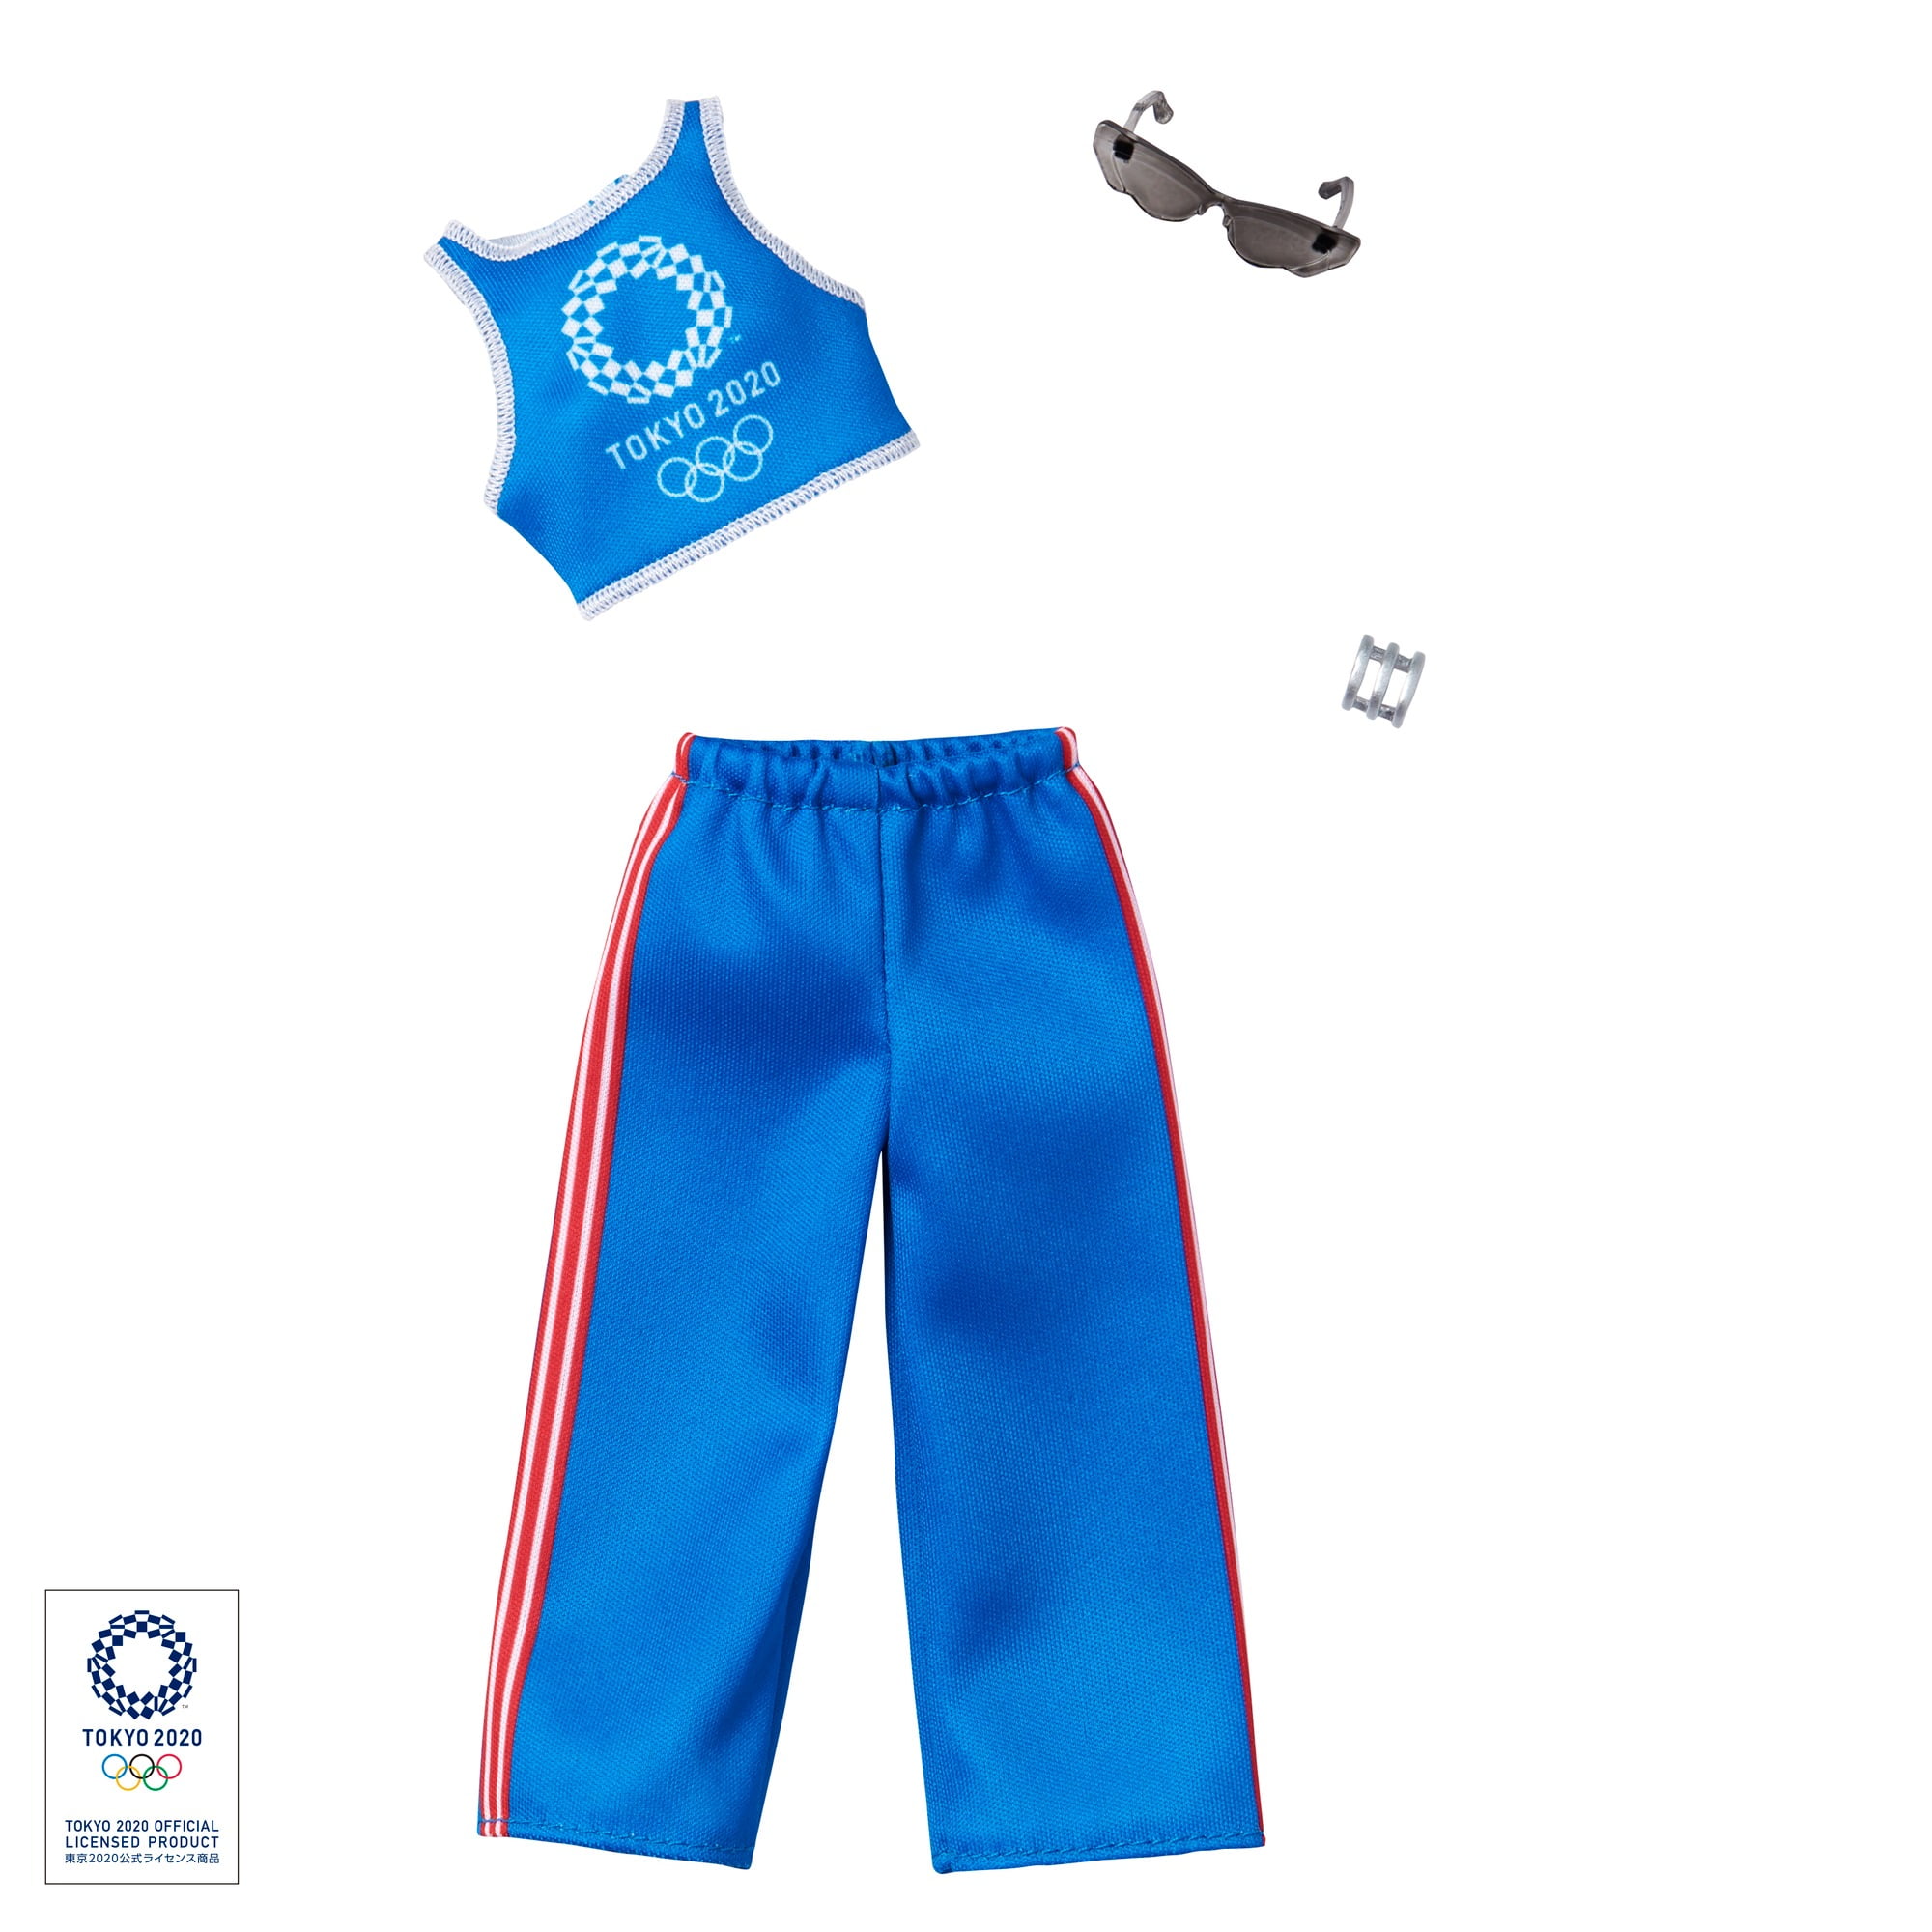 RED SHORTS Details about   2021 KEN DOLL CLOTHES,FASHION PACK  BLUE BASEBALL JERSEY 